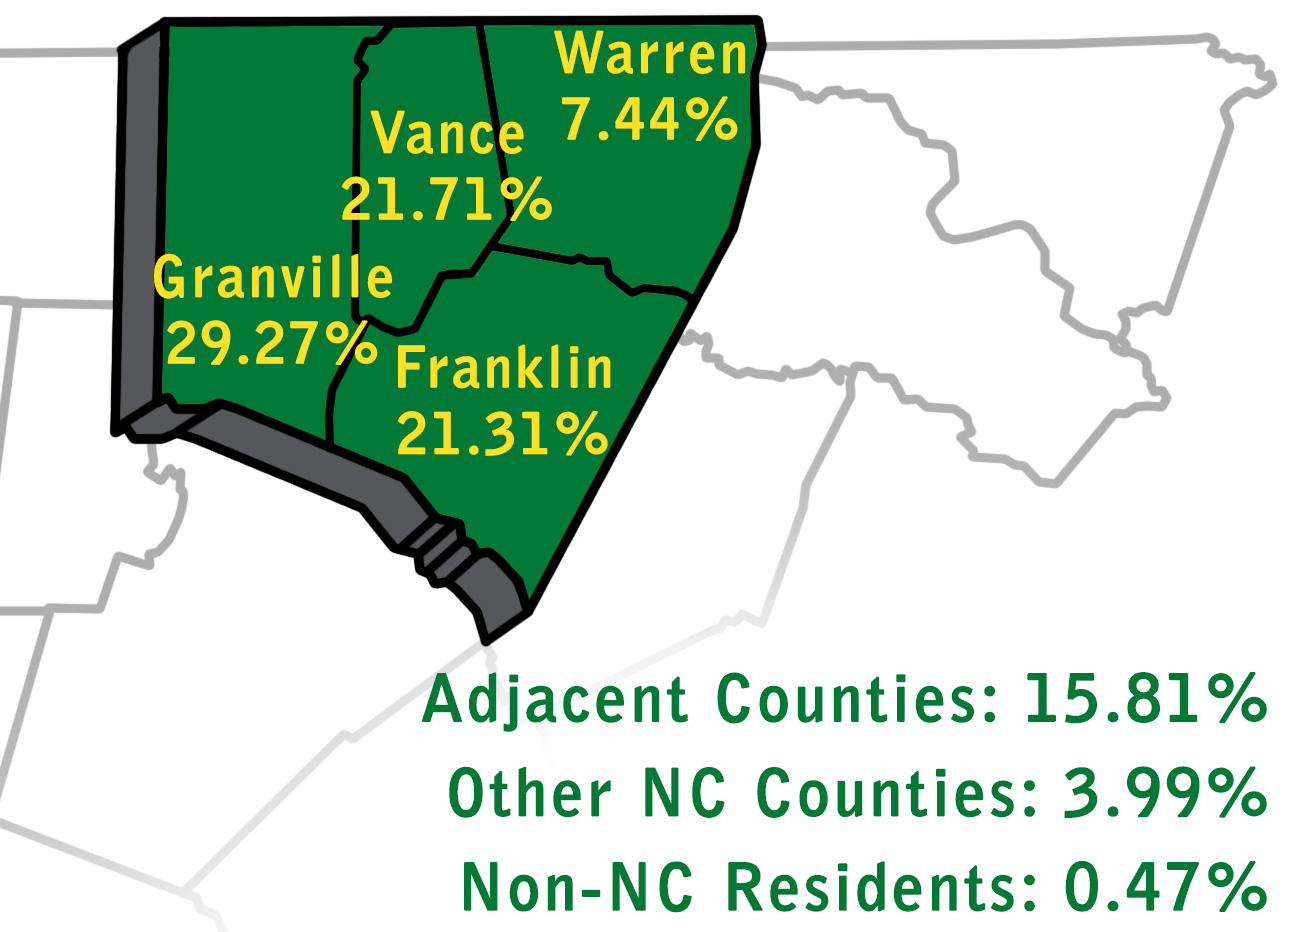 Vance 21.71%, Granville 29.27%, Franklin 21.31%, Warren 7.44%, Adjacent Counties 15.84%, Other NC County 3.99%, Non-NC Resident 0.47%